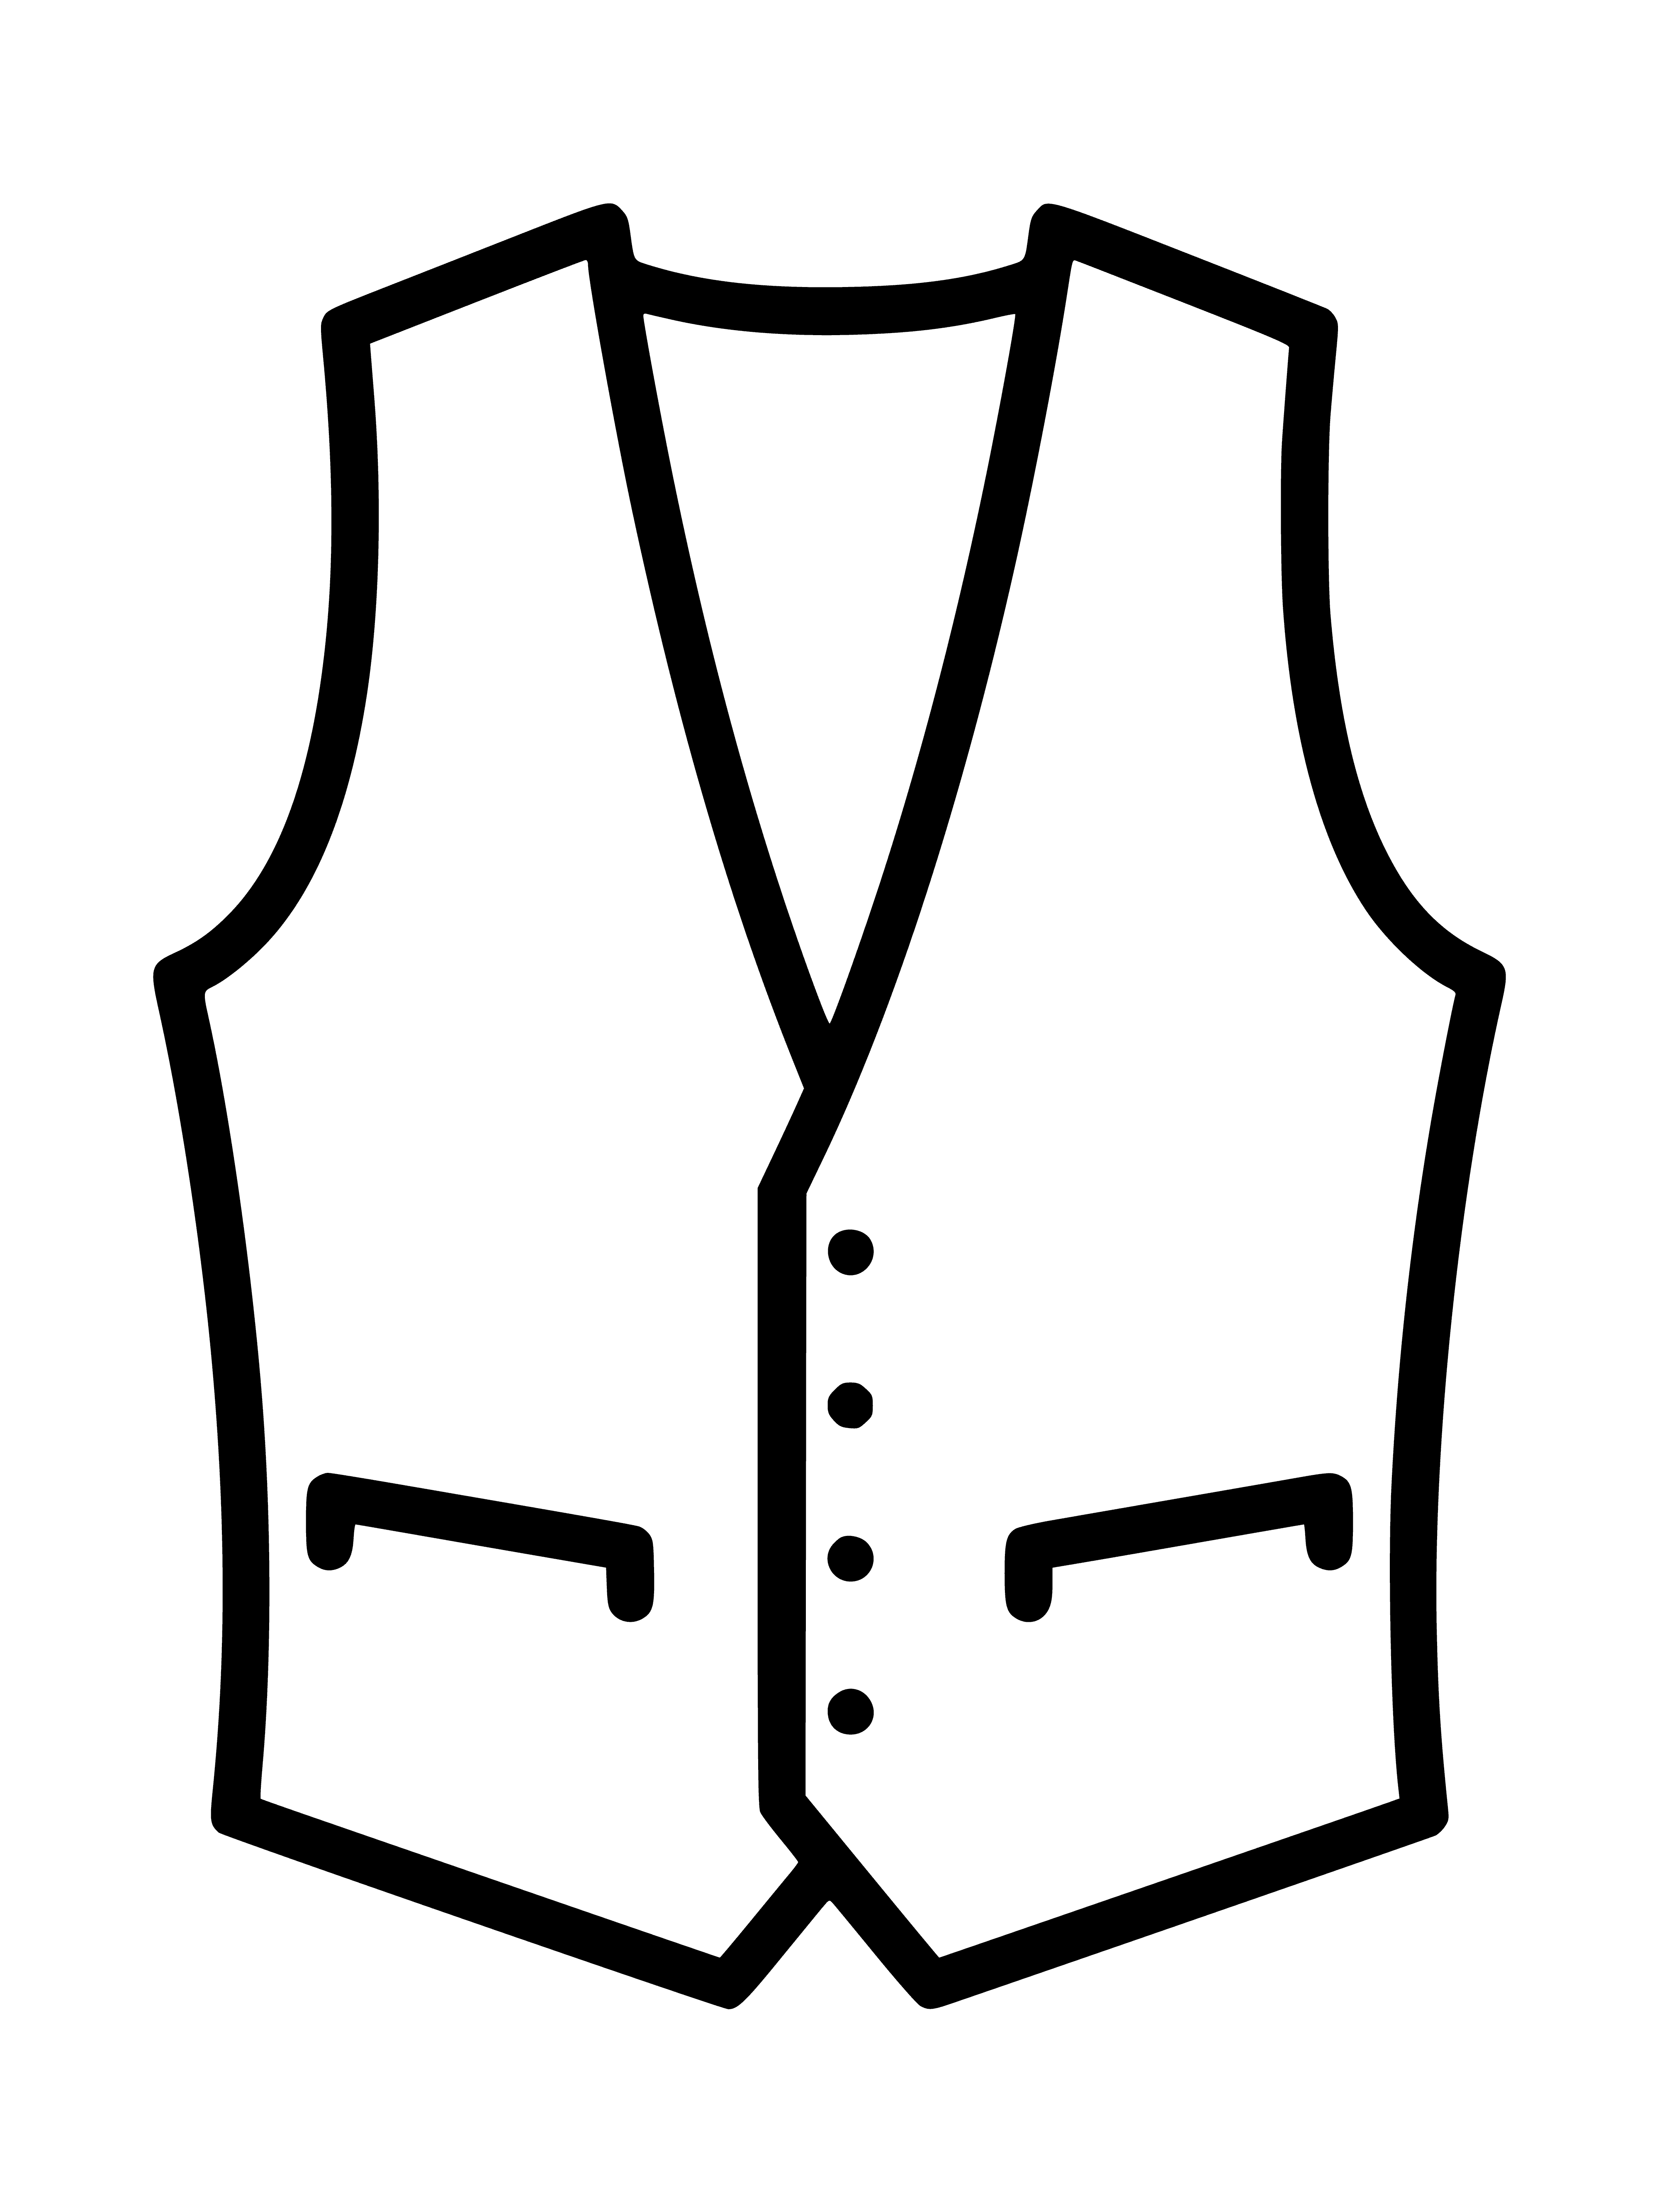 coloring page: Man wears gray V-neck sleeveless shirt, bald with beard, black pants and shoes.